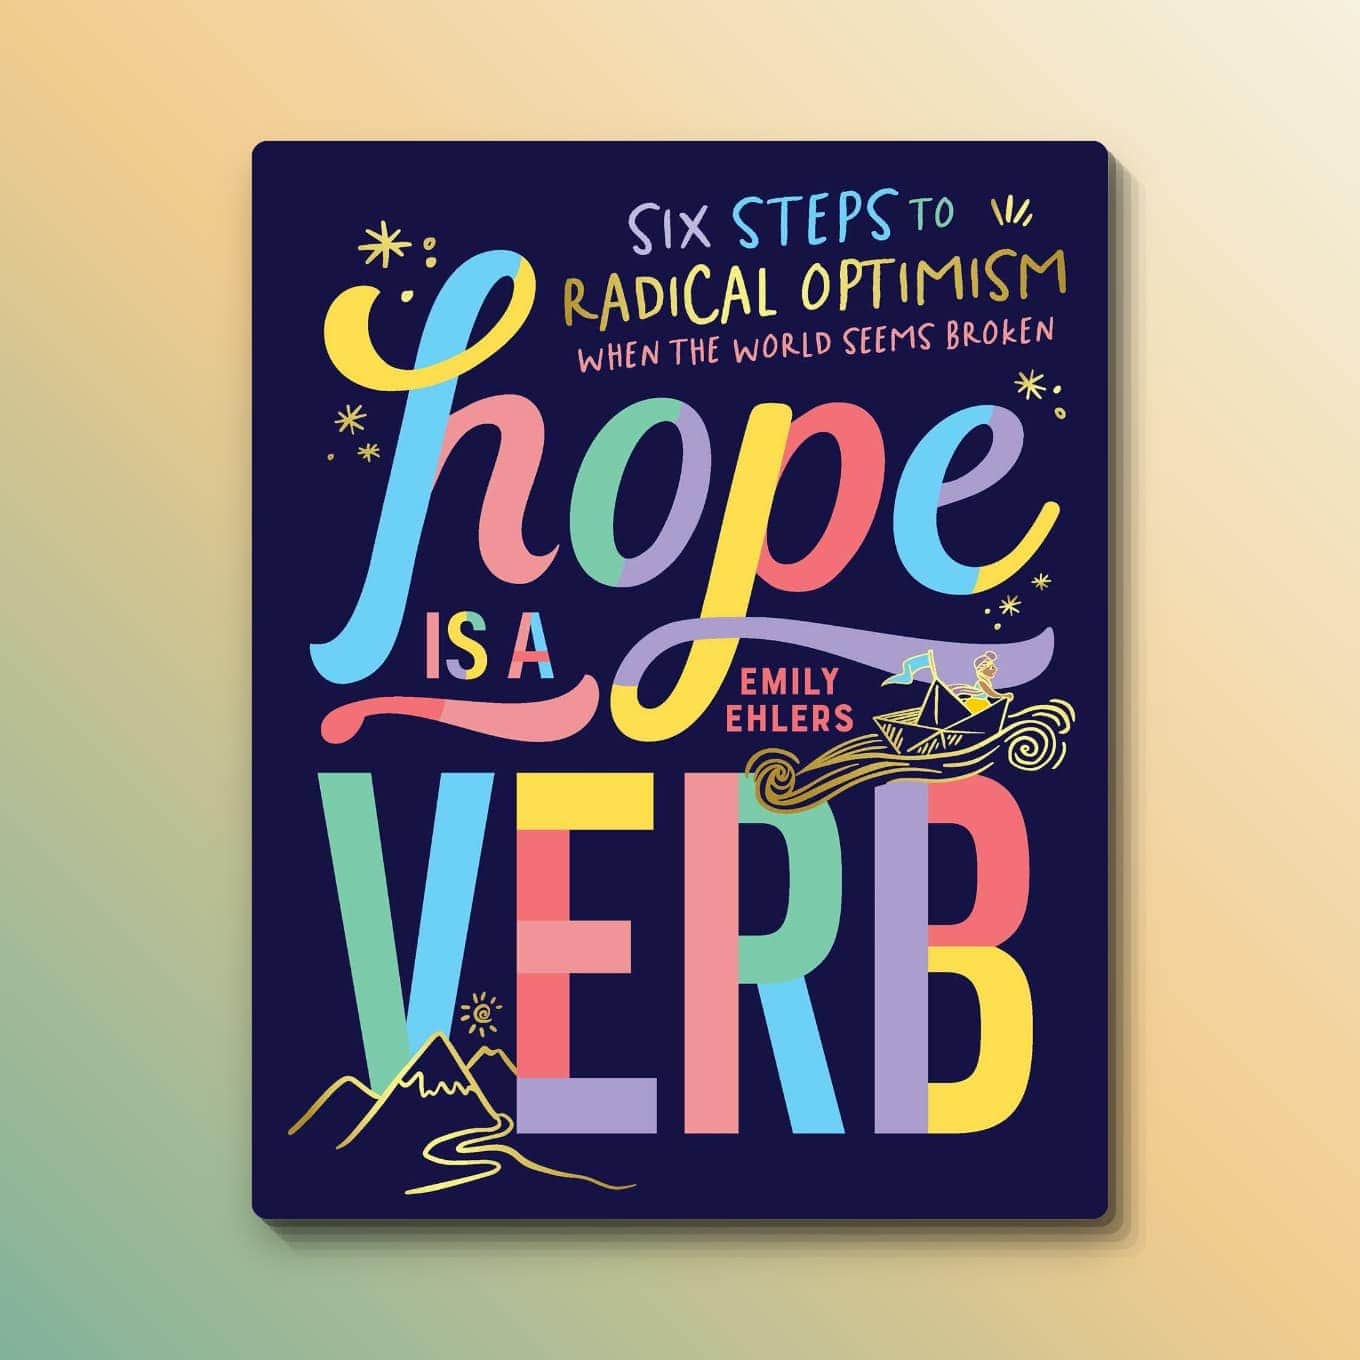 “Hope Is a Verb: Six Steps to Radical Optimism When the World Seems Broken” by Emily Ehlers